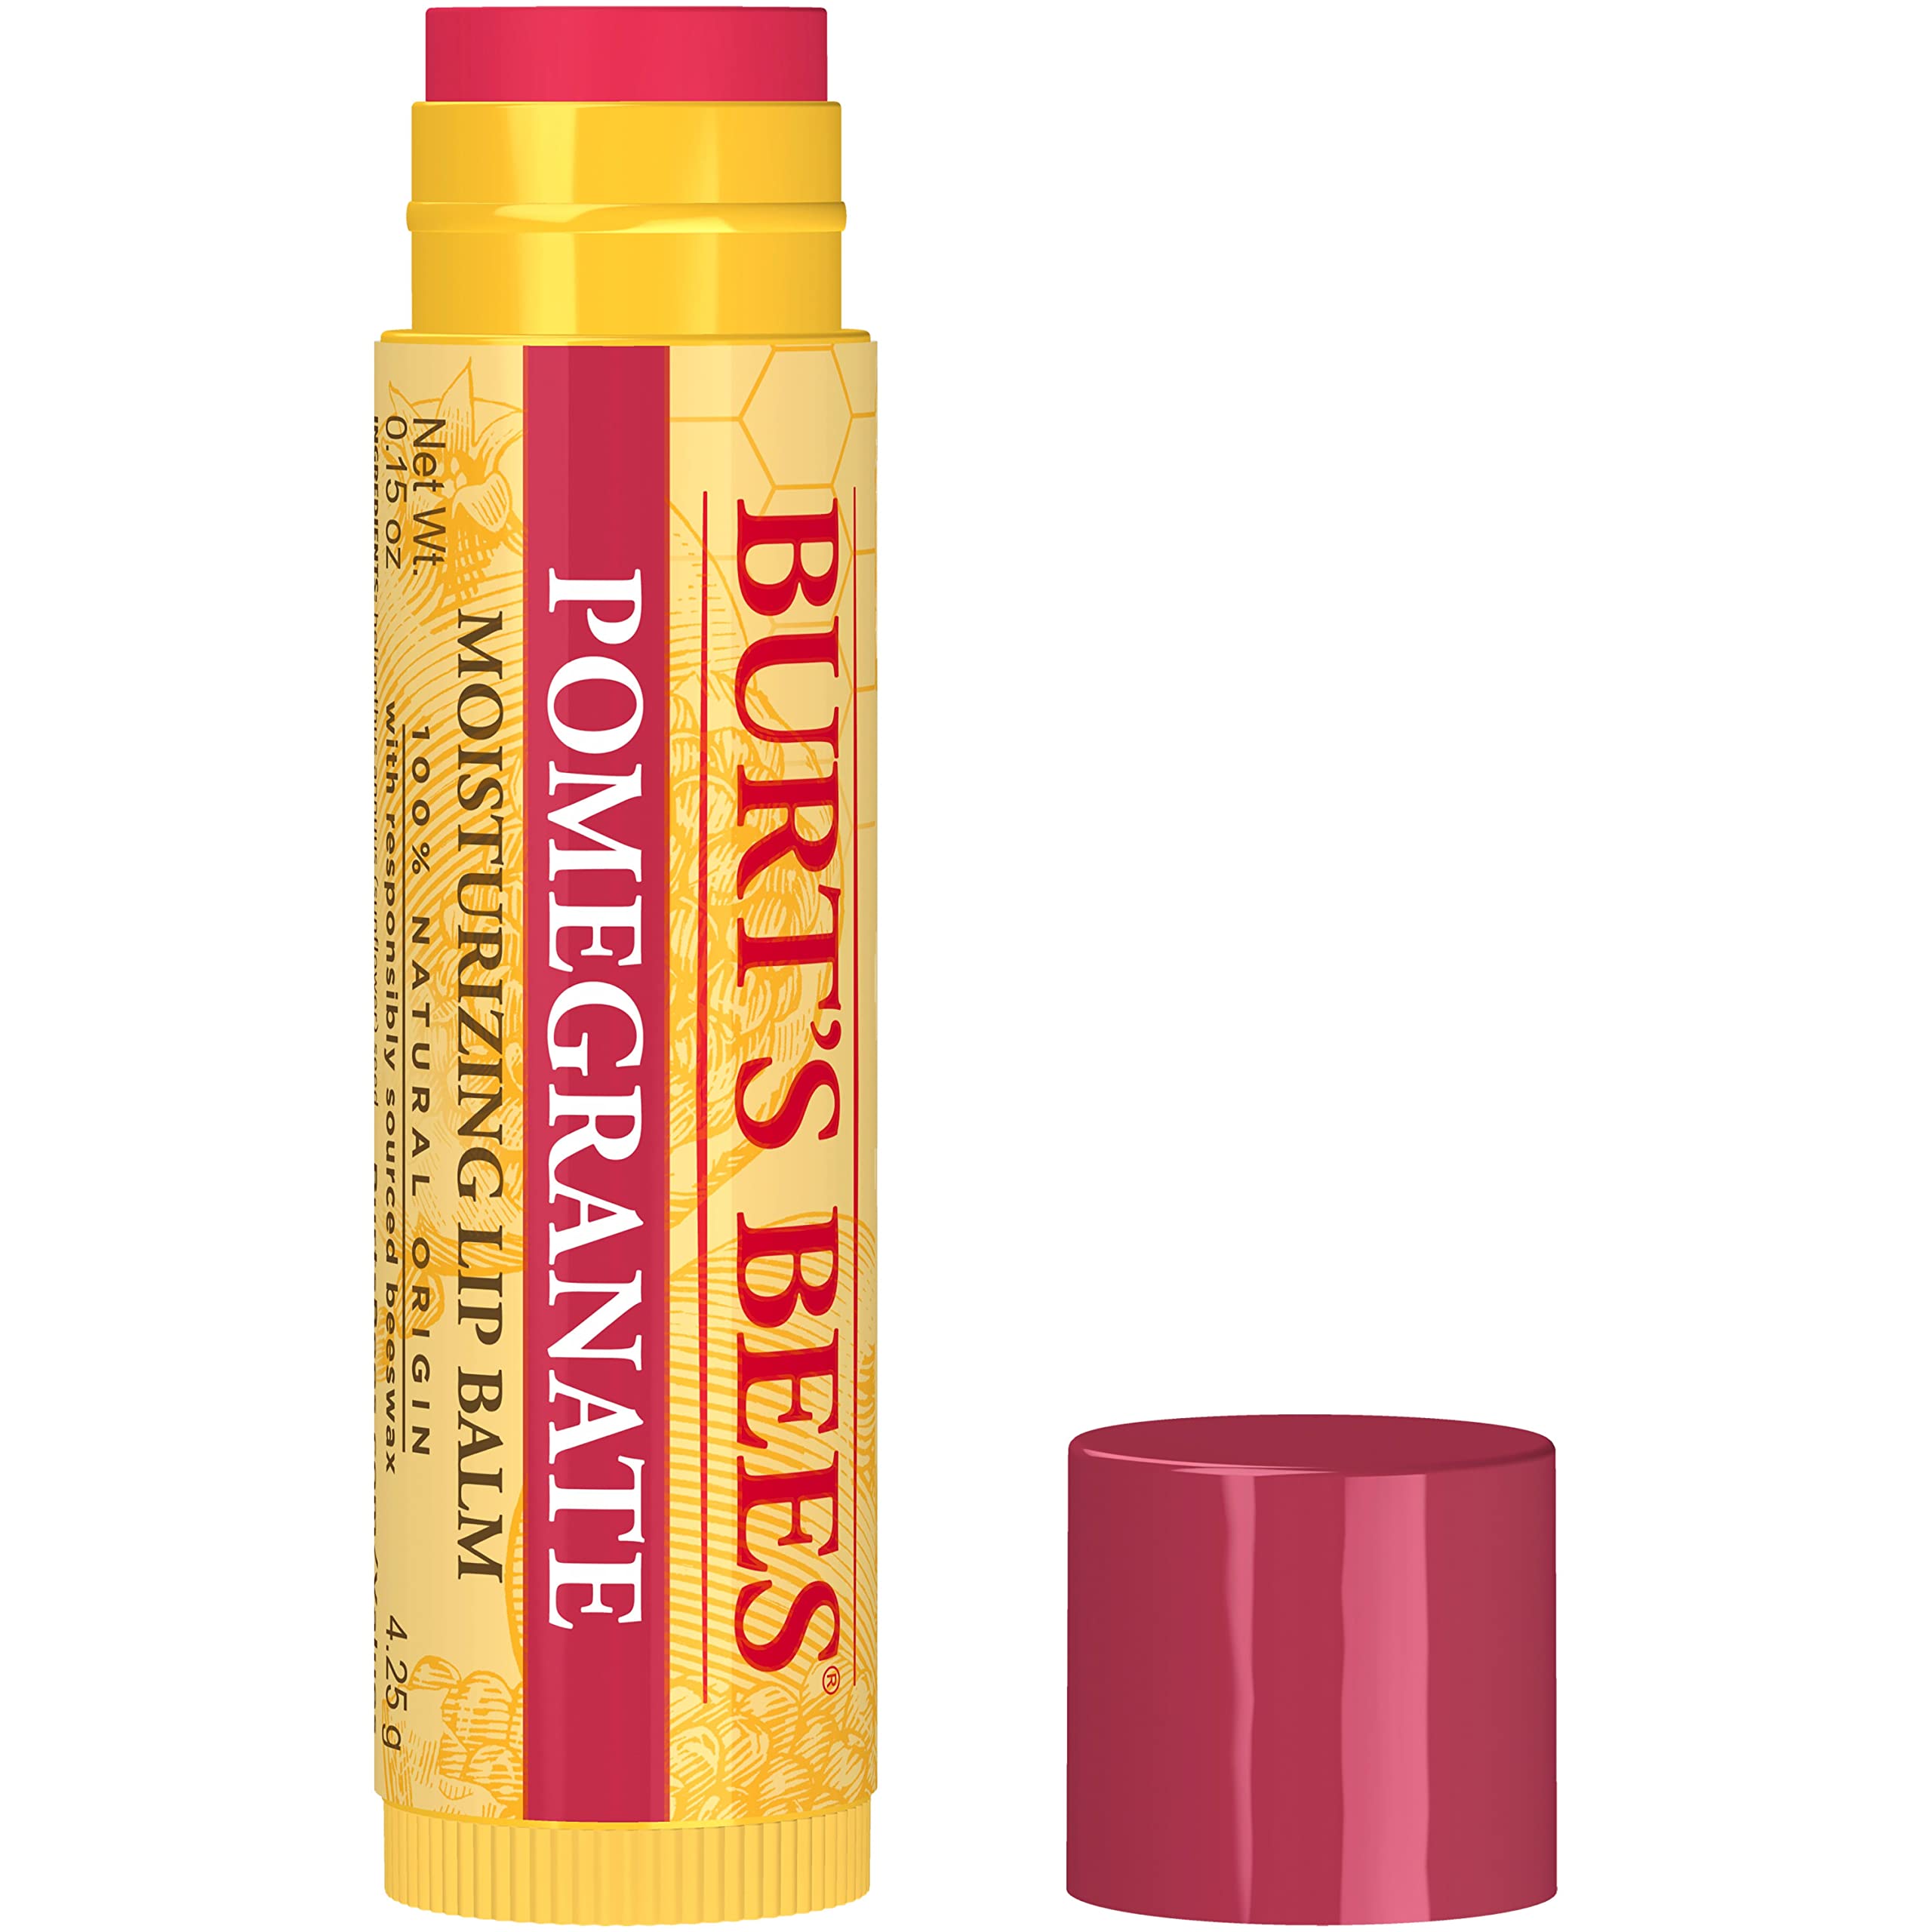  Burt's Bees Beeswax Lip Balm, Lip Moisturizer With Responsibly  Sourced Beeswax, Tint-Free, Natural Conditioning Lip Treatment, 4 Tubes,  0.15 oz. : Baby